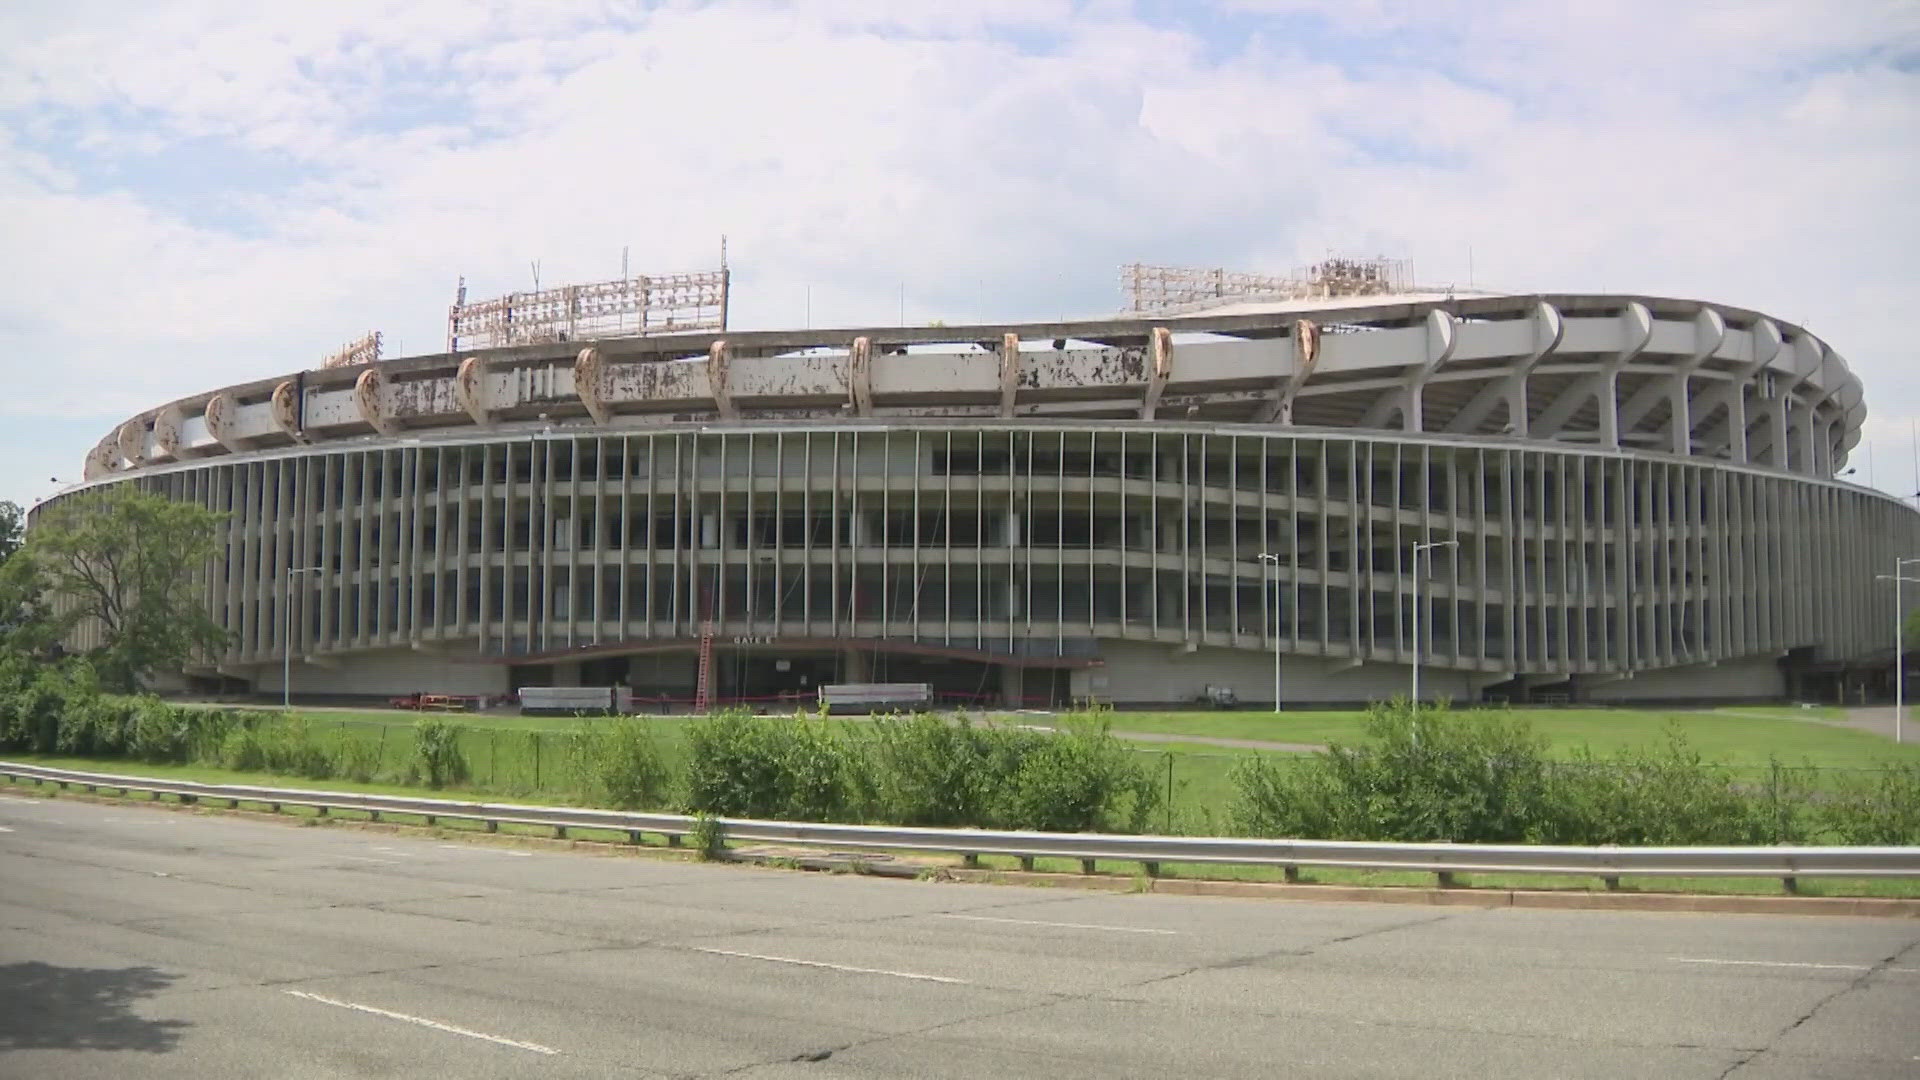 Work to tear down RFK started years ago.